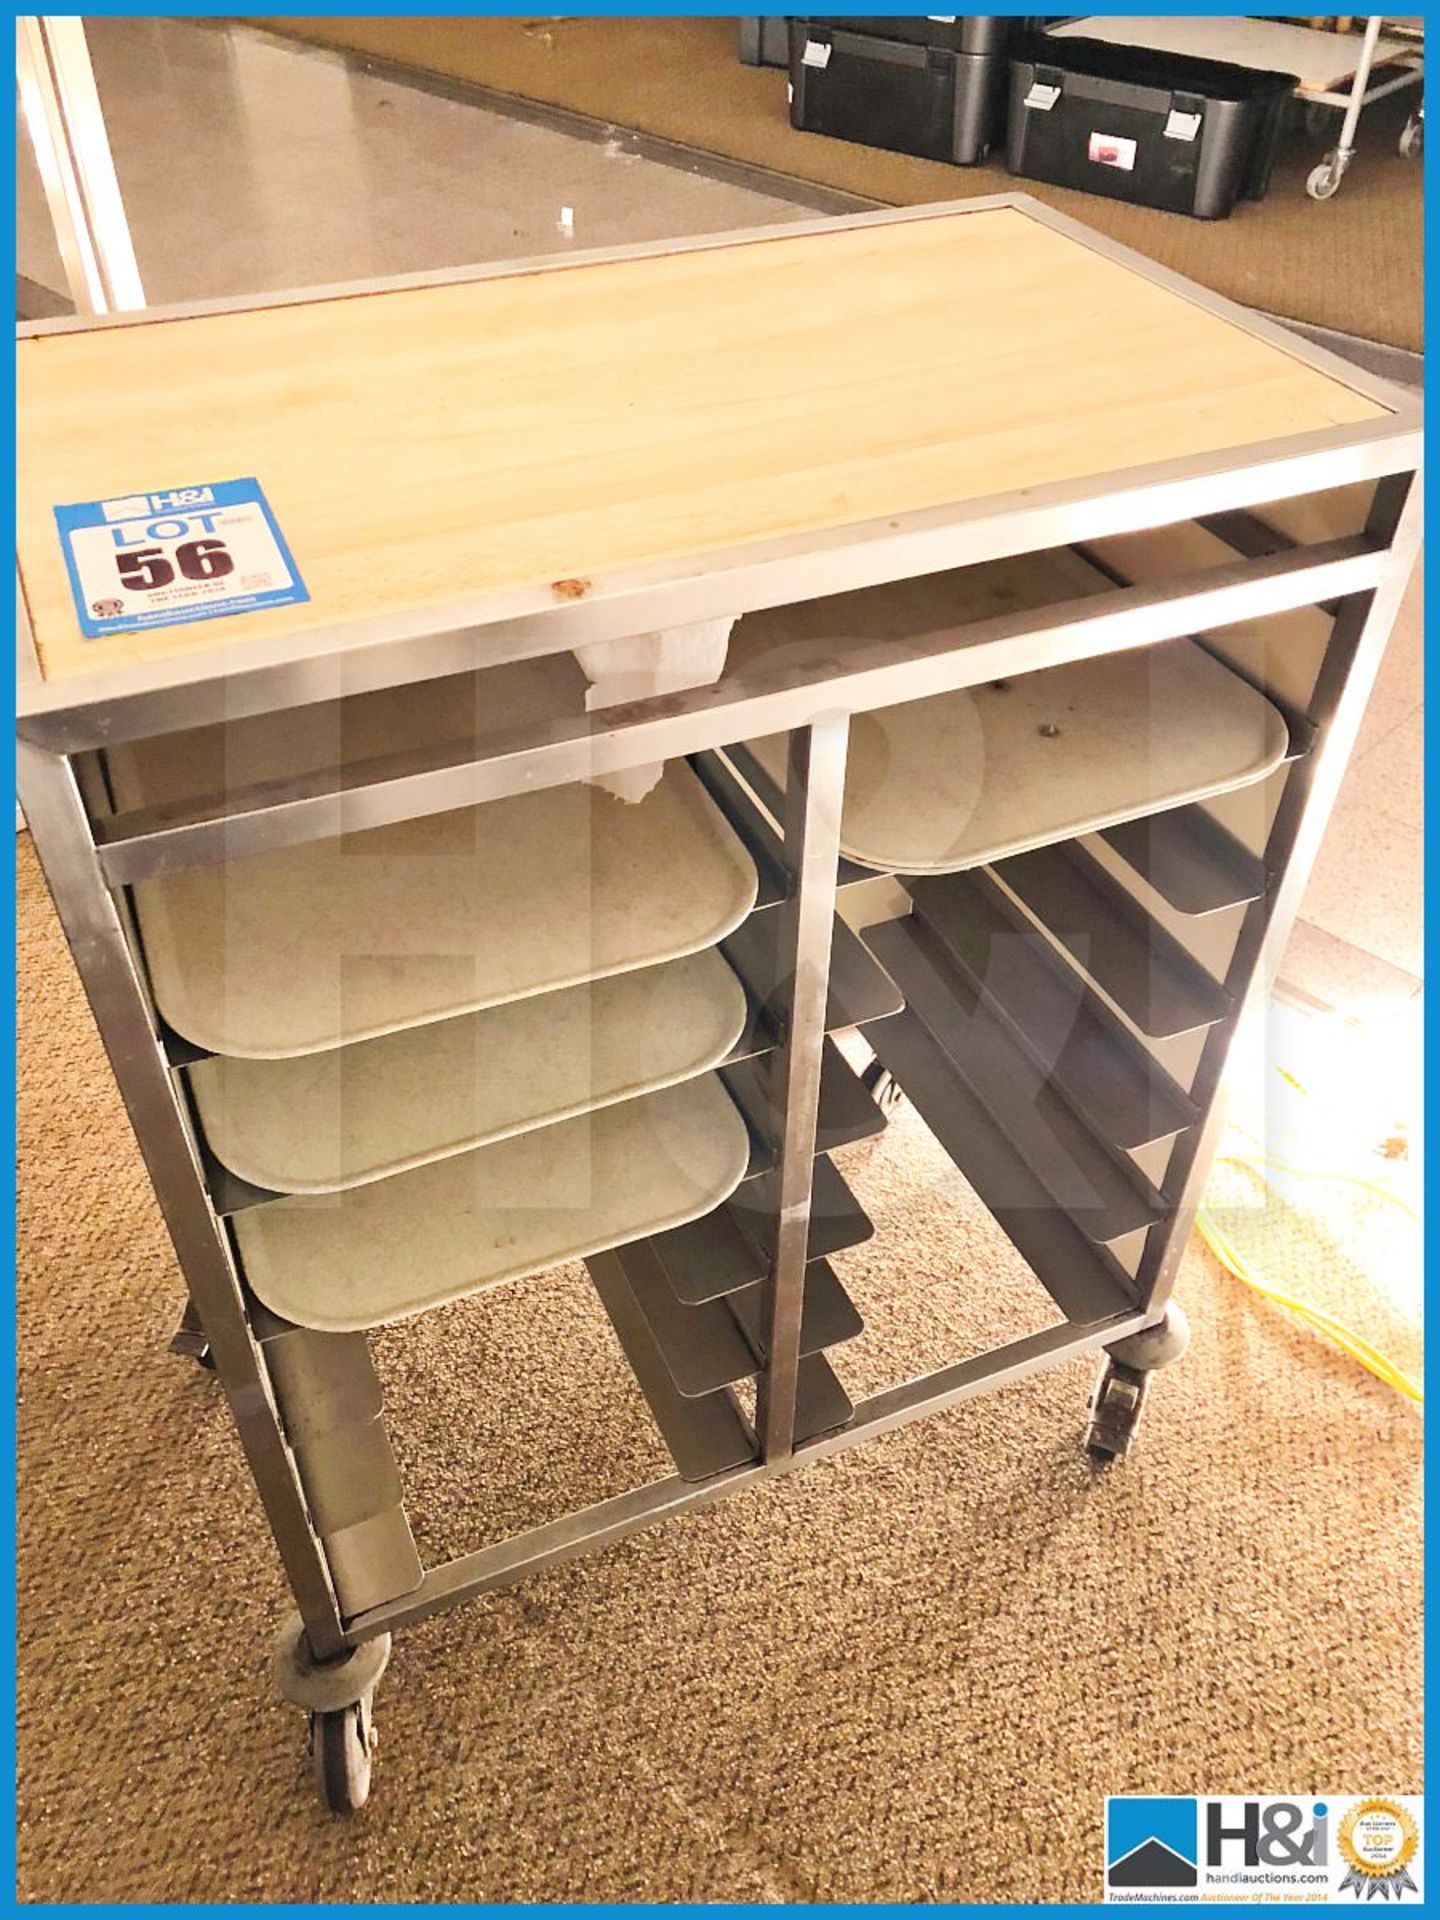 Cantine tray storage unit stainless steel frame.